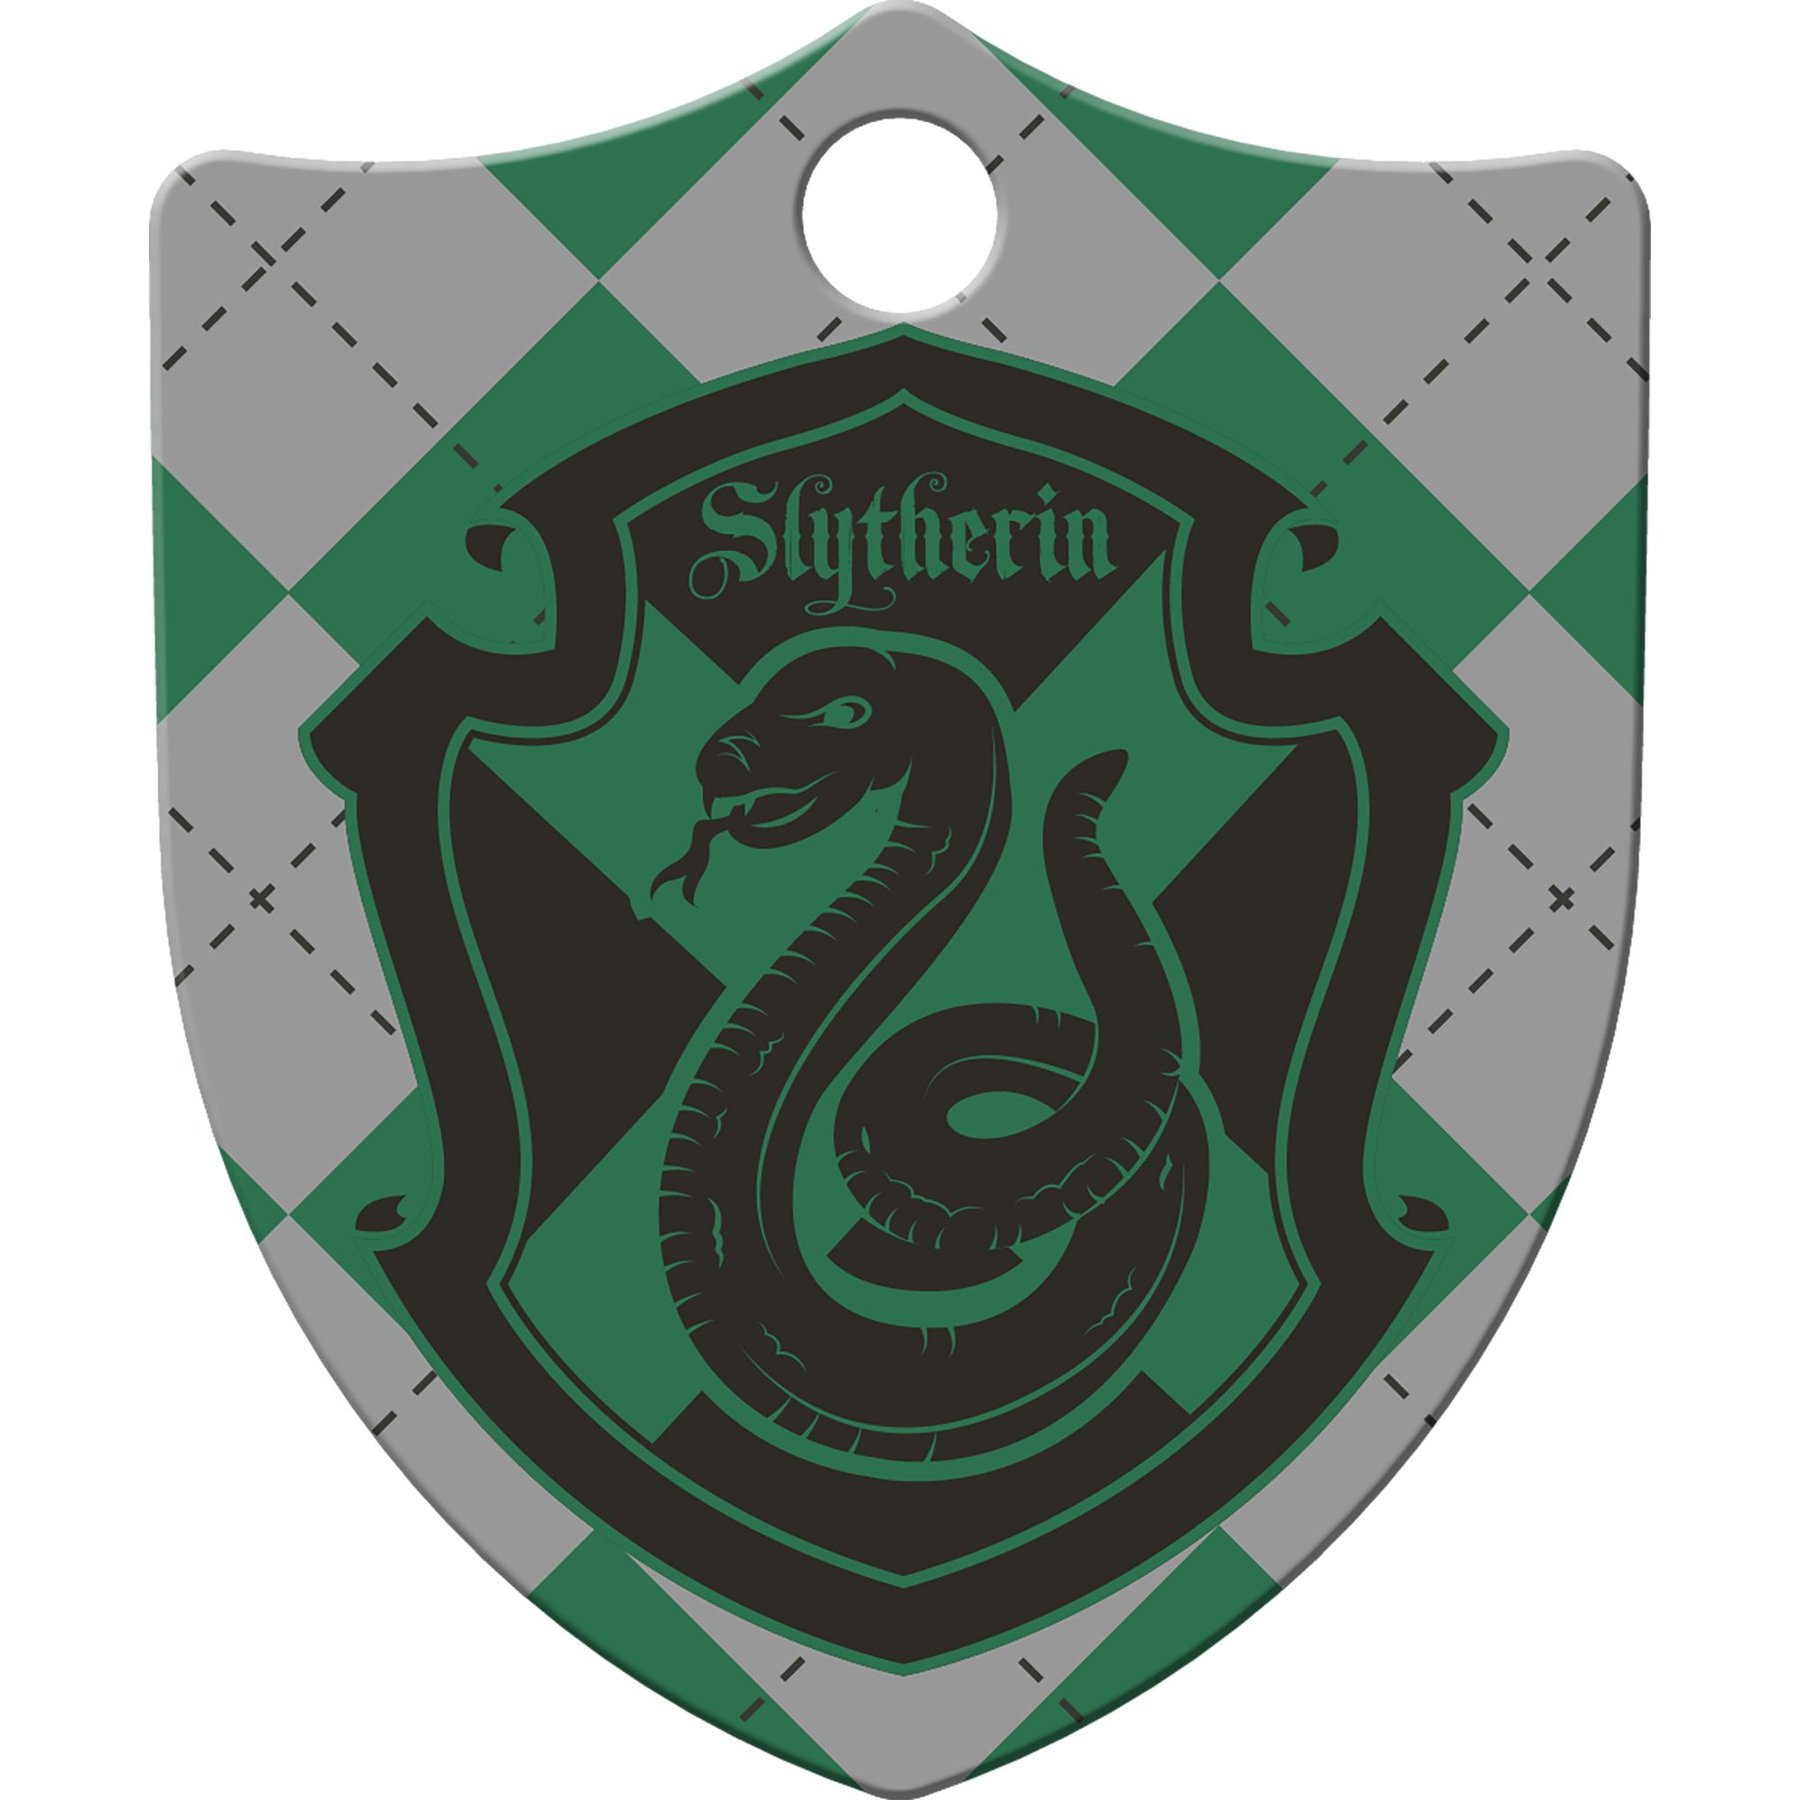 Large Shield Harry Potter Ravenclaw Crest, Pet ID Tag – Quick-Tag